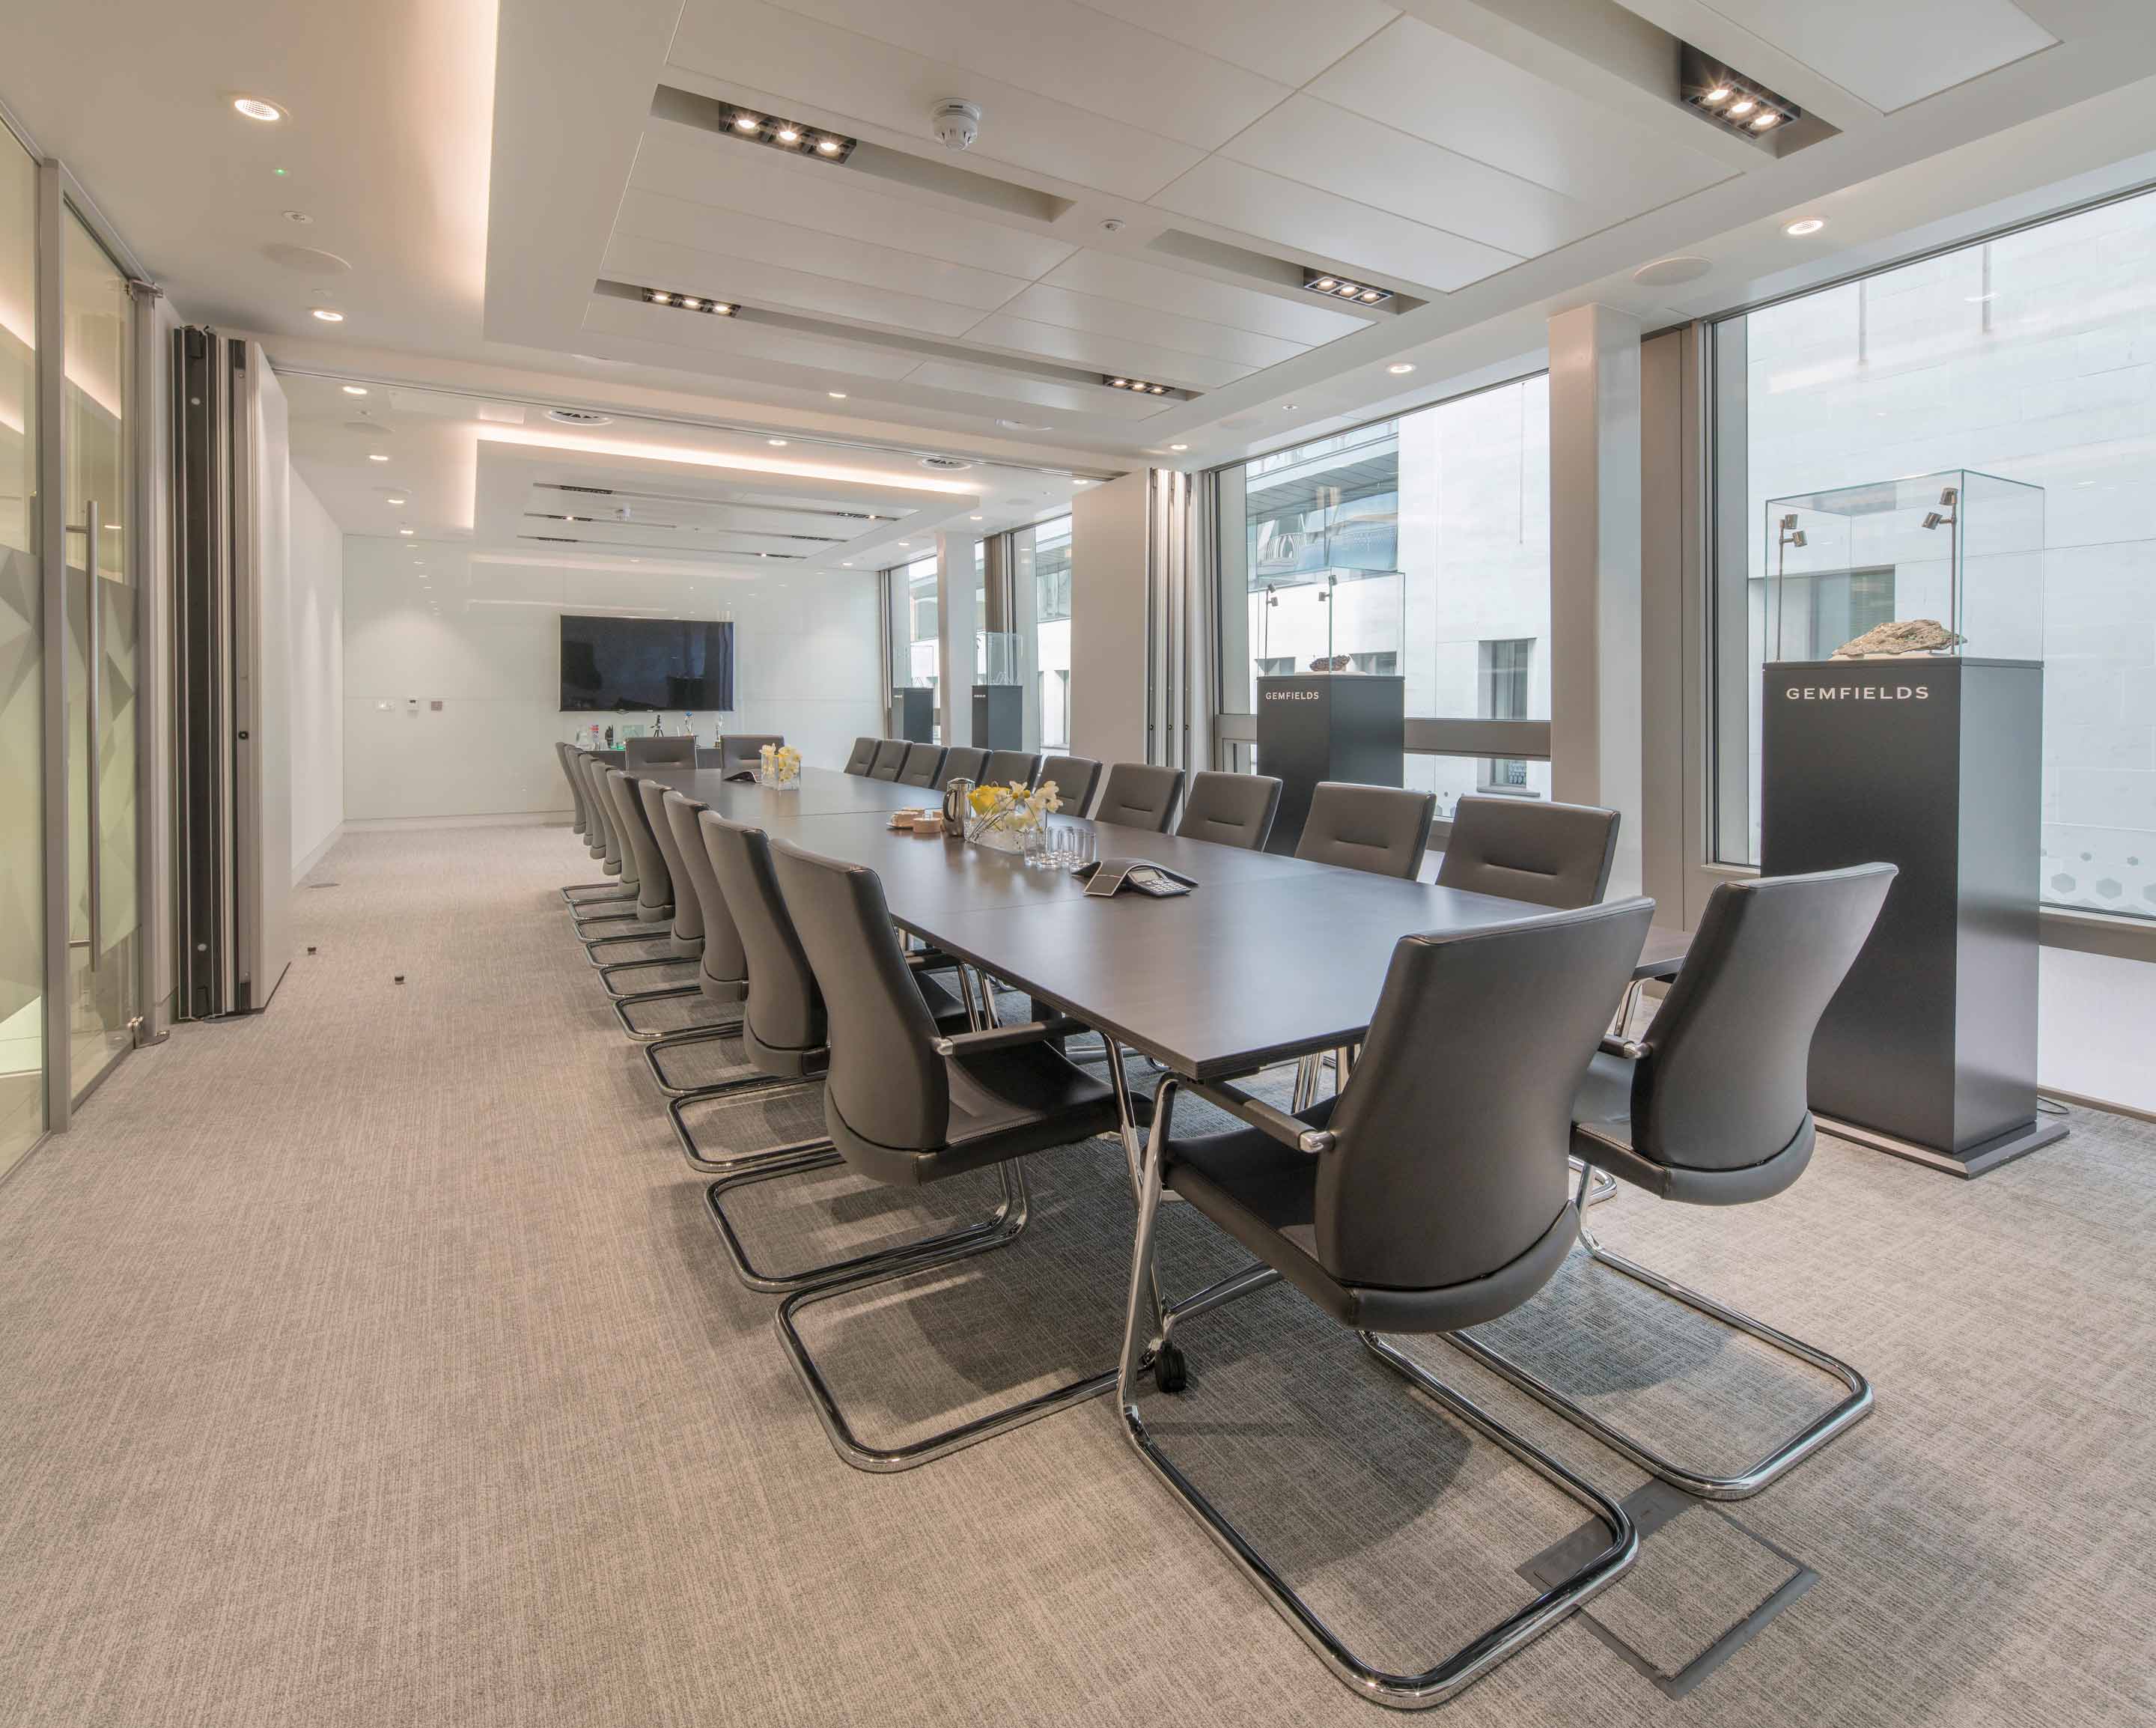 Meeting room with a grey rectangle table with glass encased displays along the outside wall